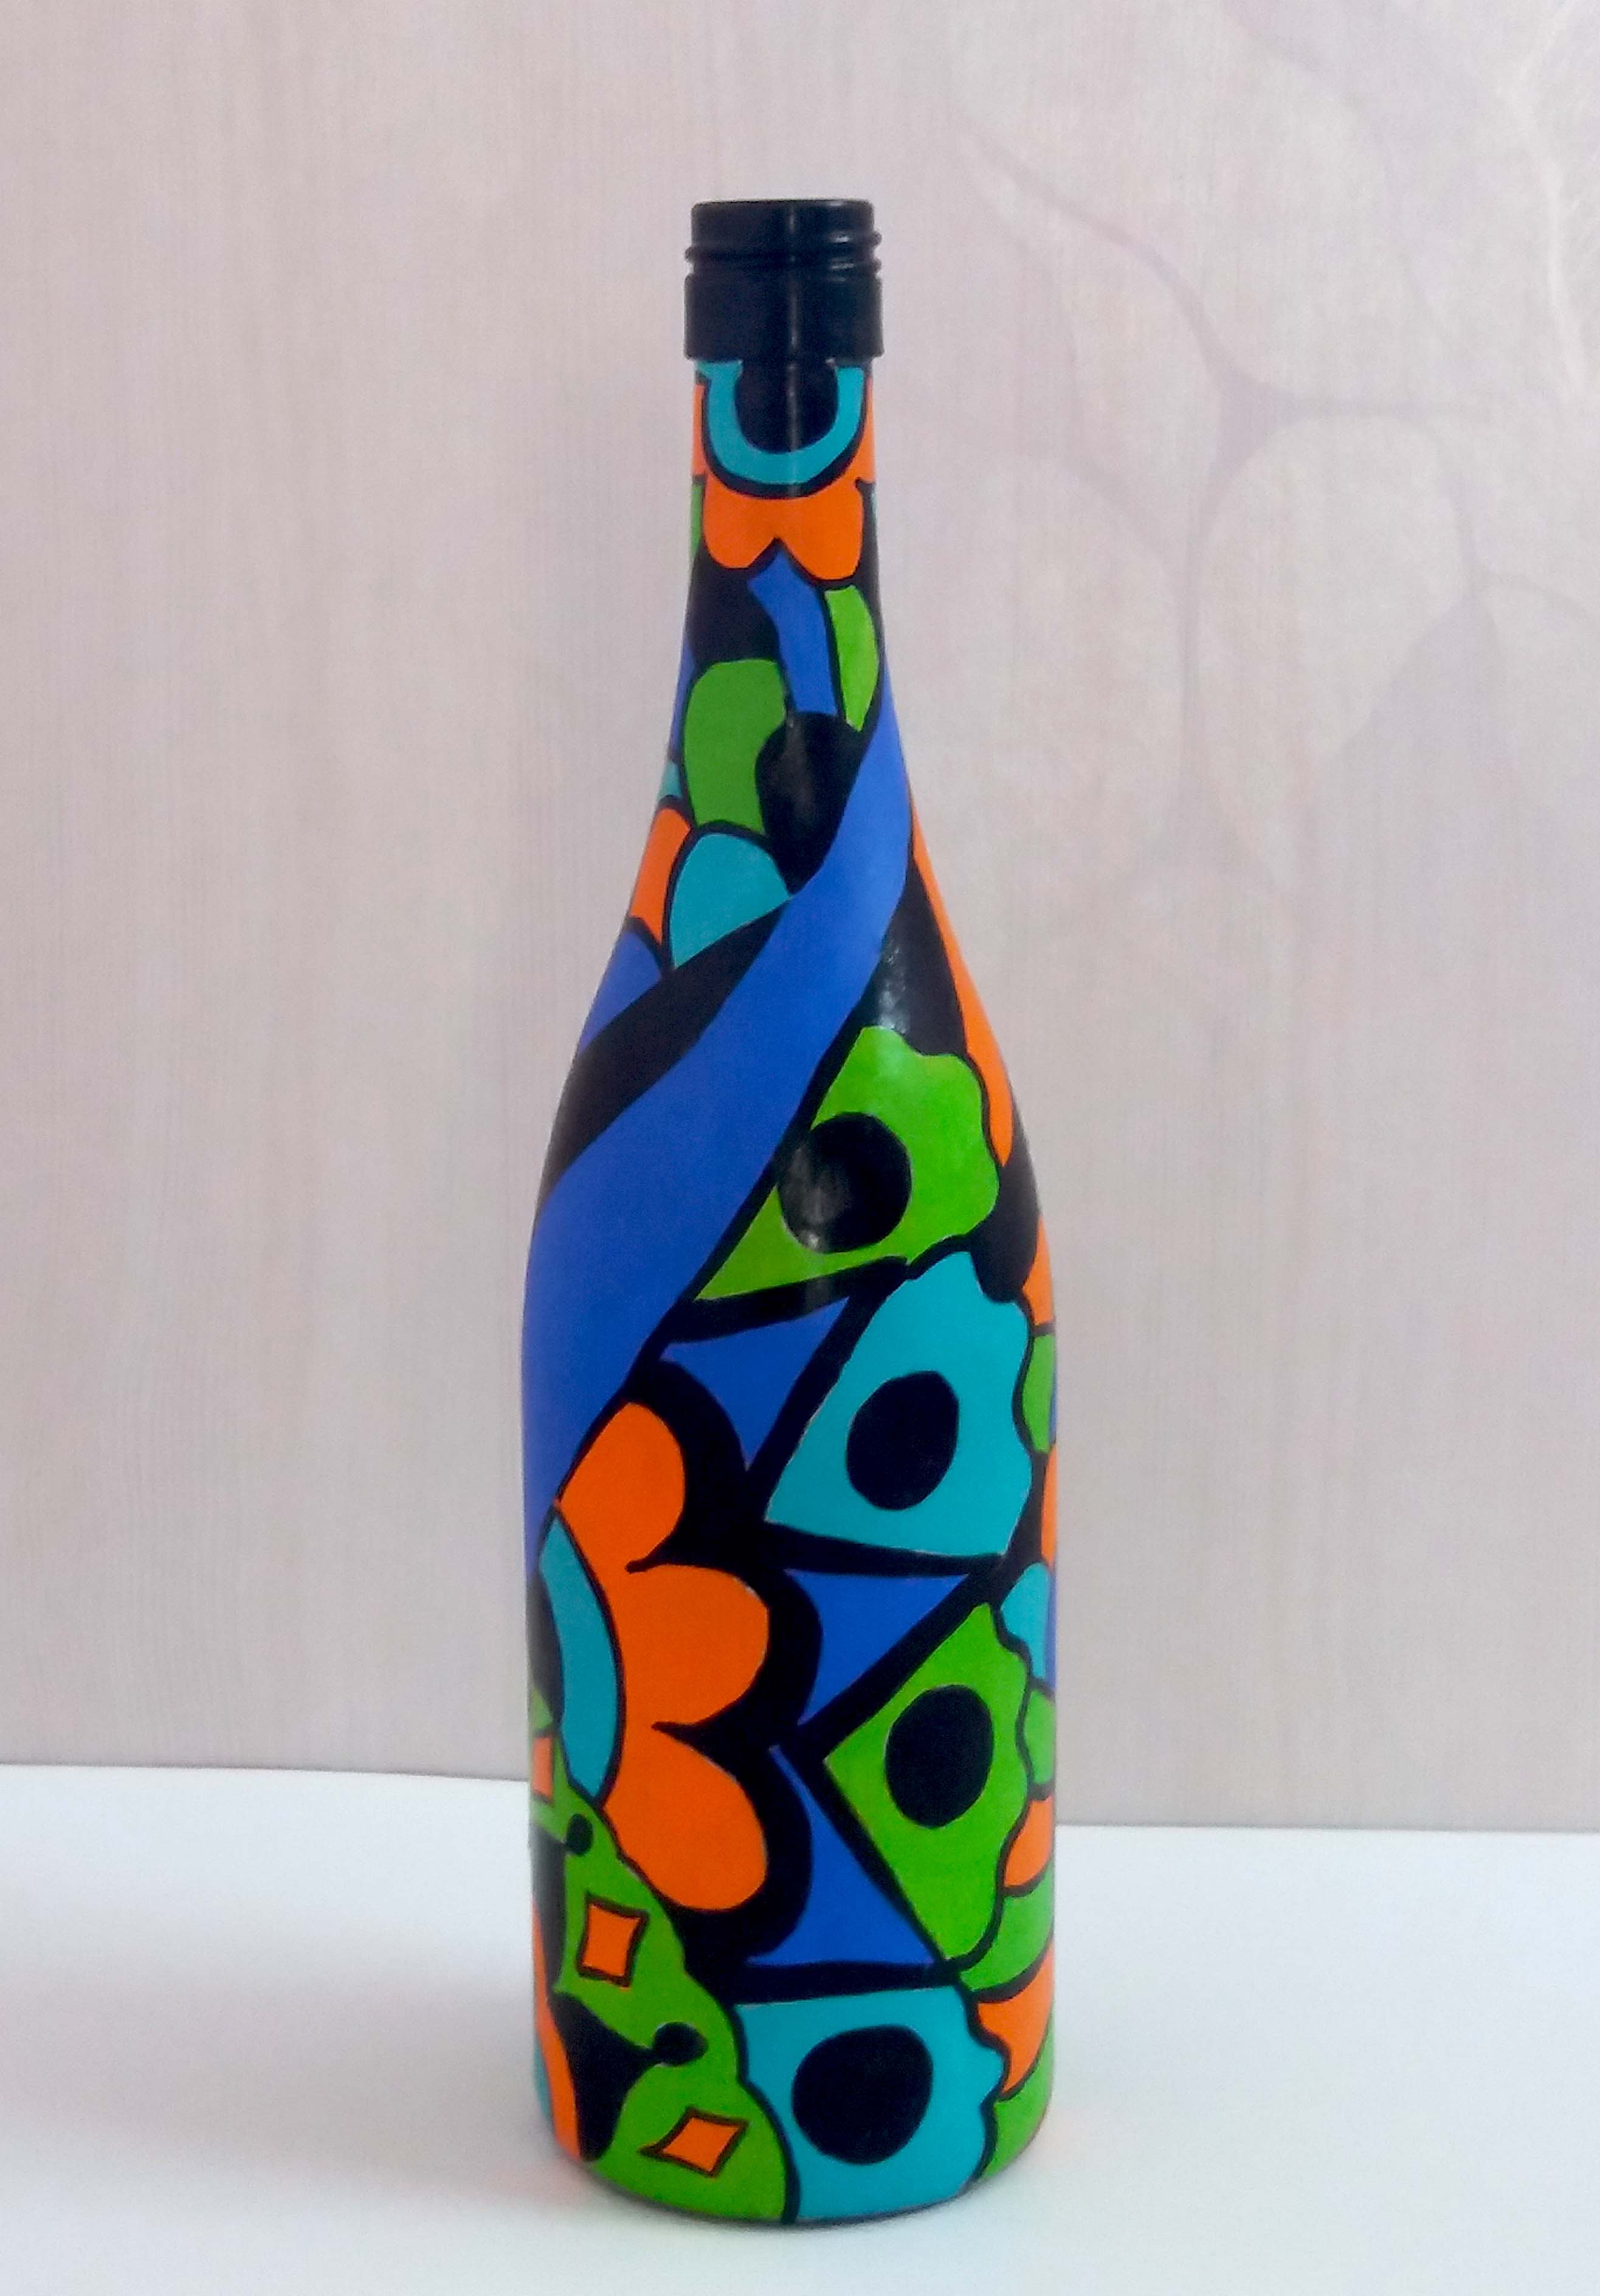 Hand Painted Recycled Bottle Vases Set Of 3 Vases Décor Home Décor World Art Community